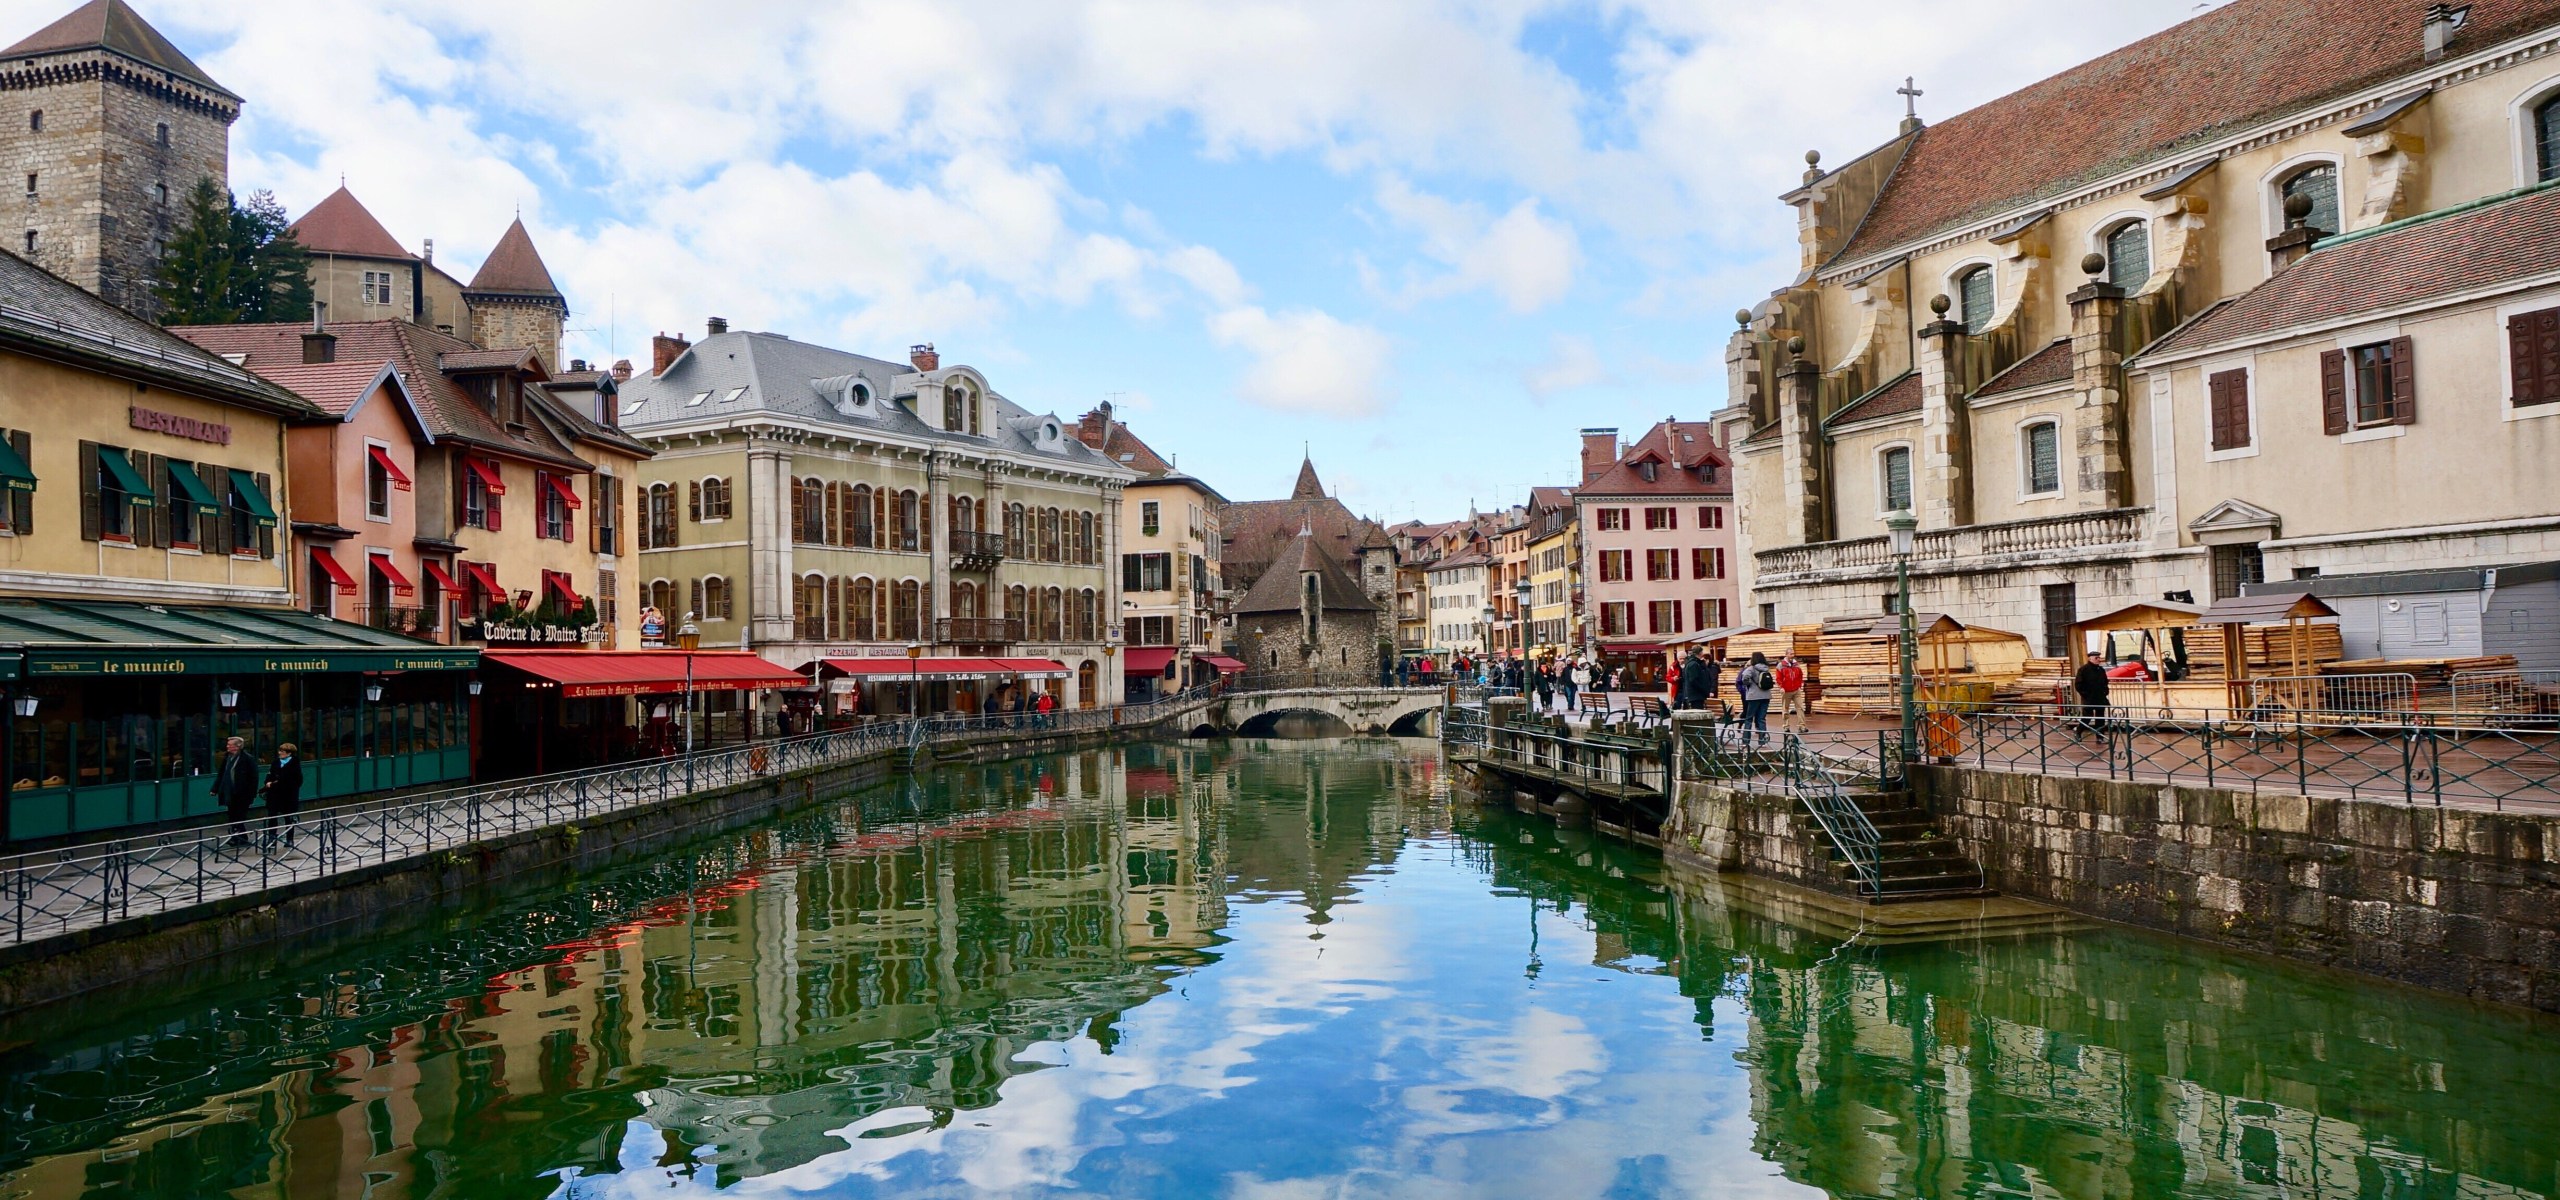 A day in Annecy, France - thewelltravelledman